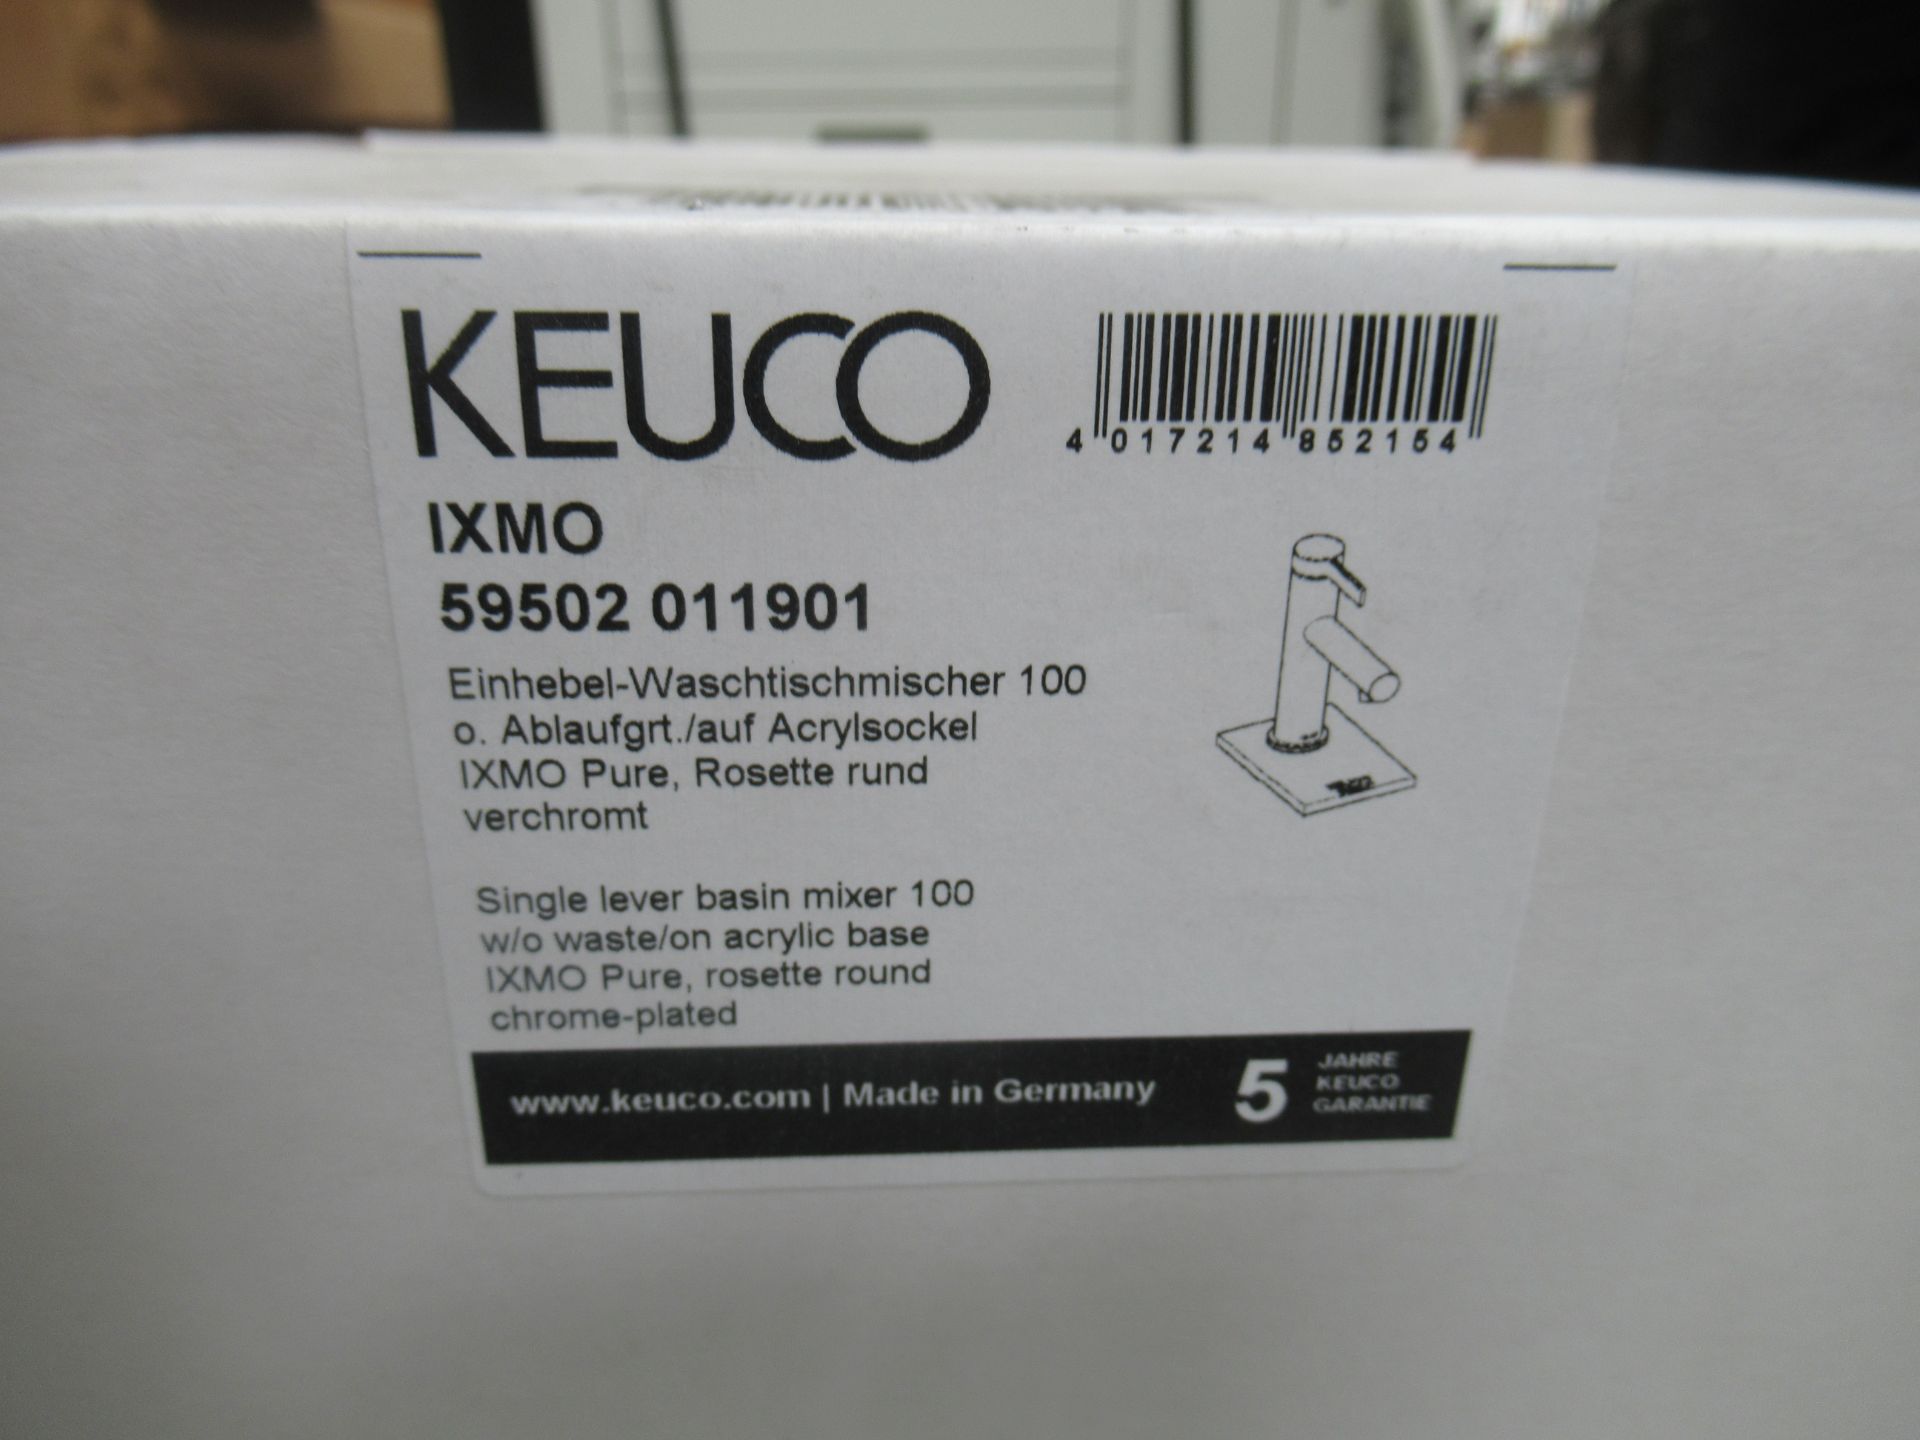 A Keuco IXMO Single Lever Basin Mixer 100-Tap, Chrome Plated, P/N 59502-011901 - Image 2 of 3